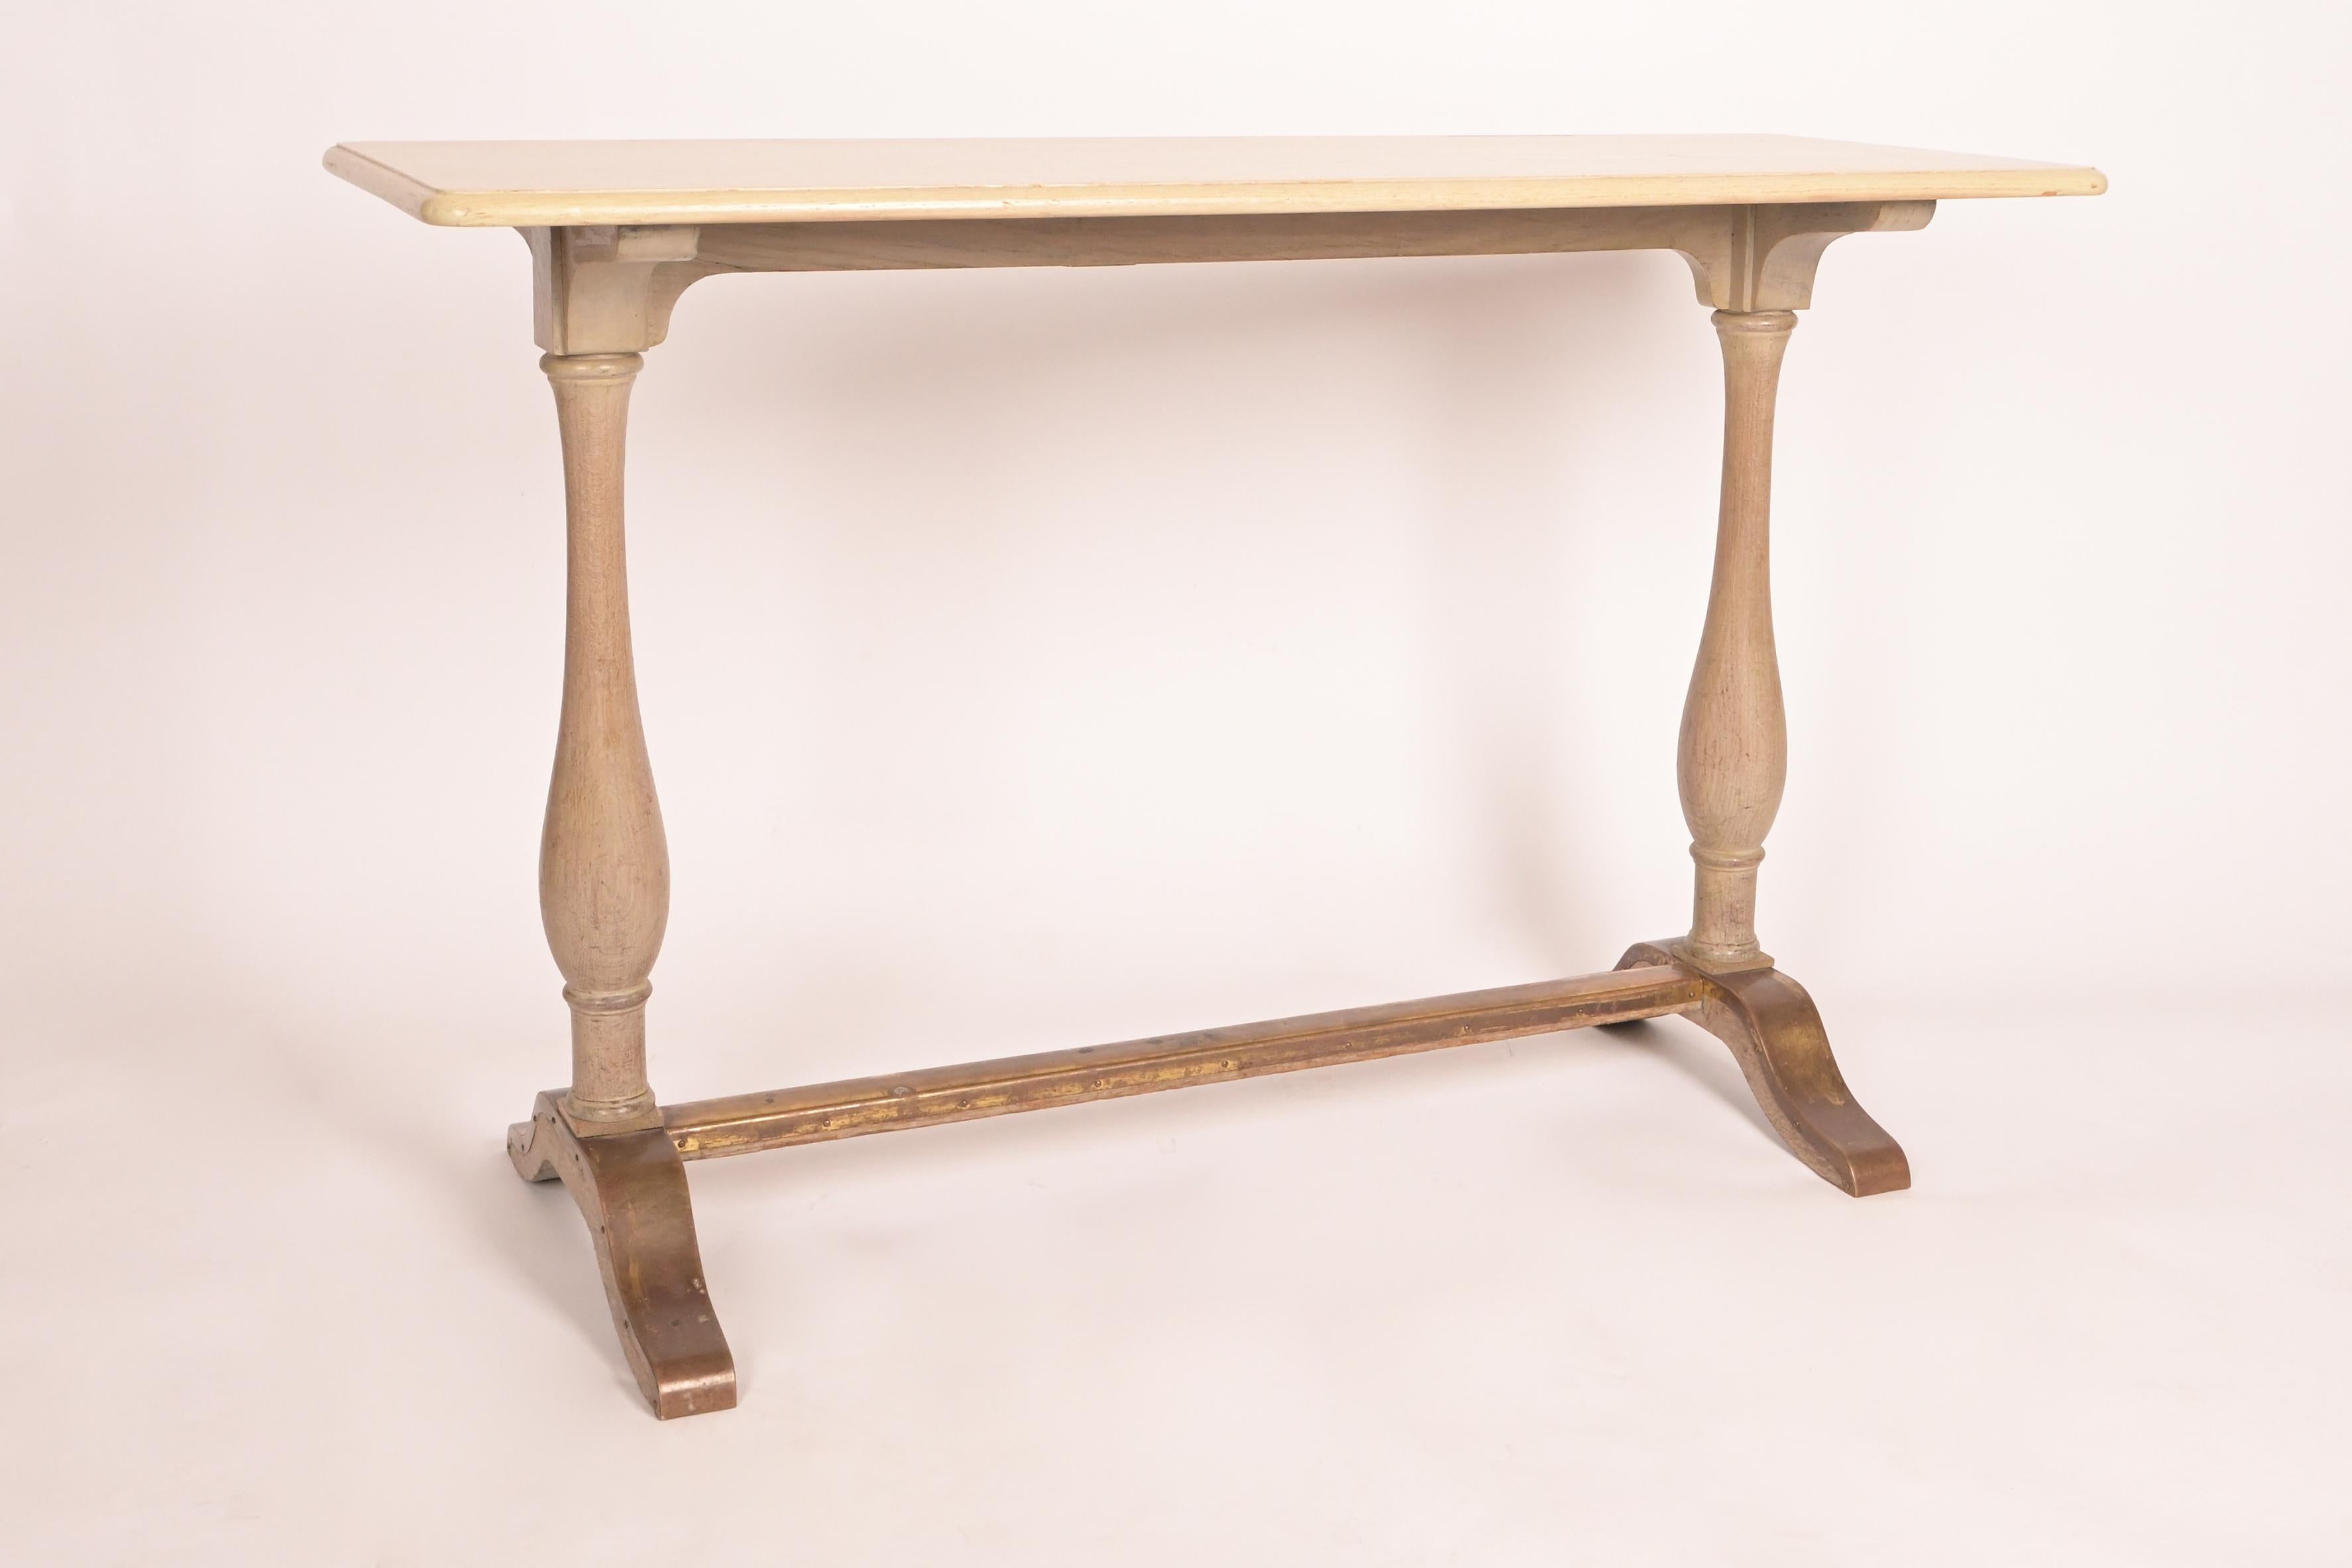 The fine oak rectangular top with rounded corners supported at each end by slender baluster shaped turnings joined by stretcher at base with brass clad feet and stretcher having original patina, the wooden surfaces with a cerused finish. This design